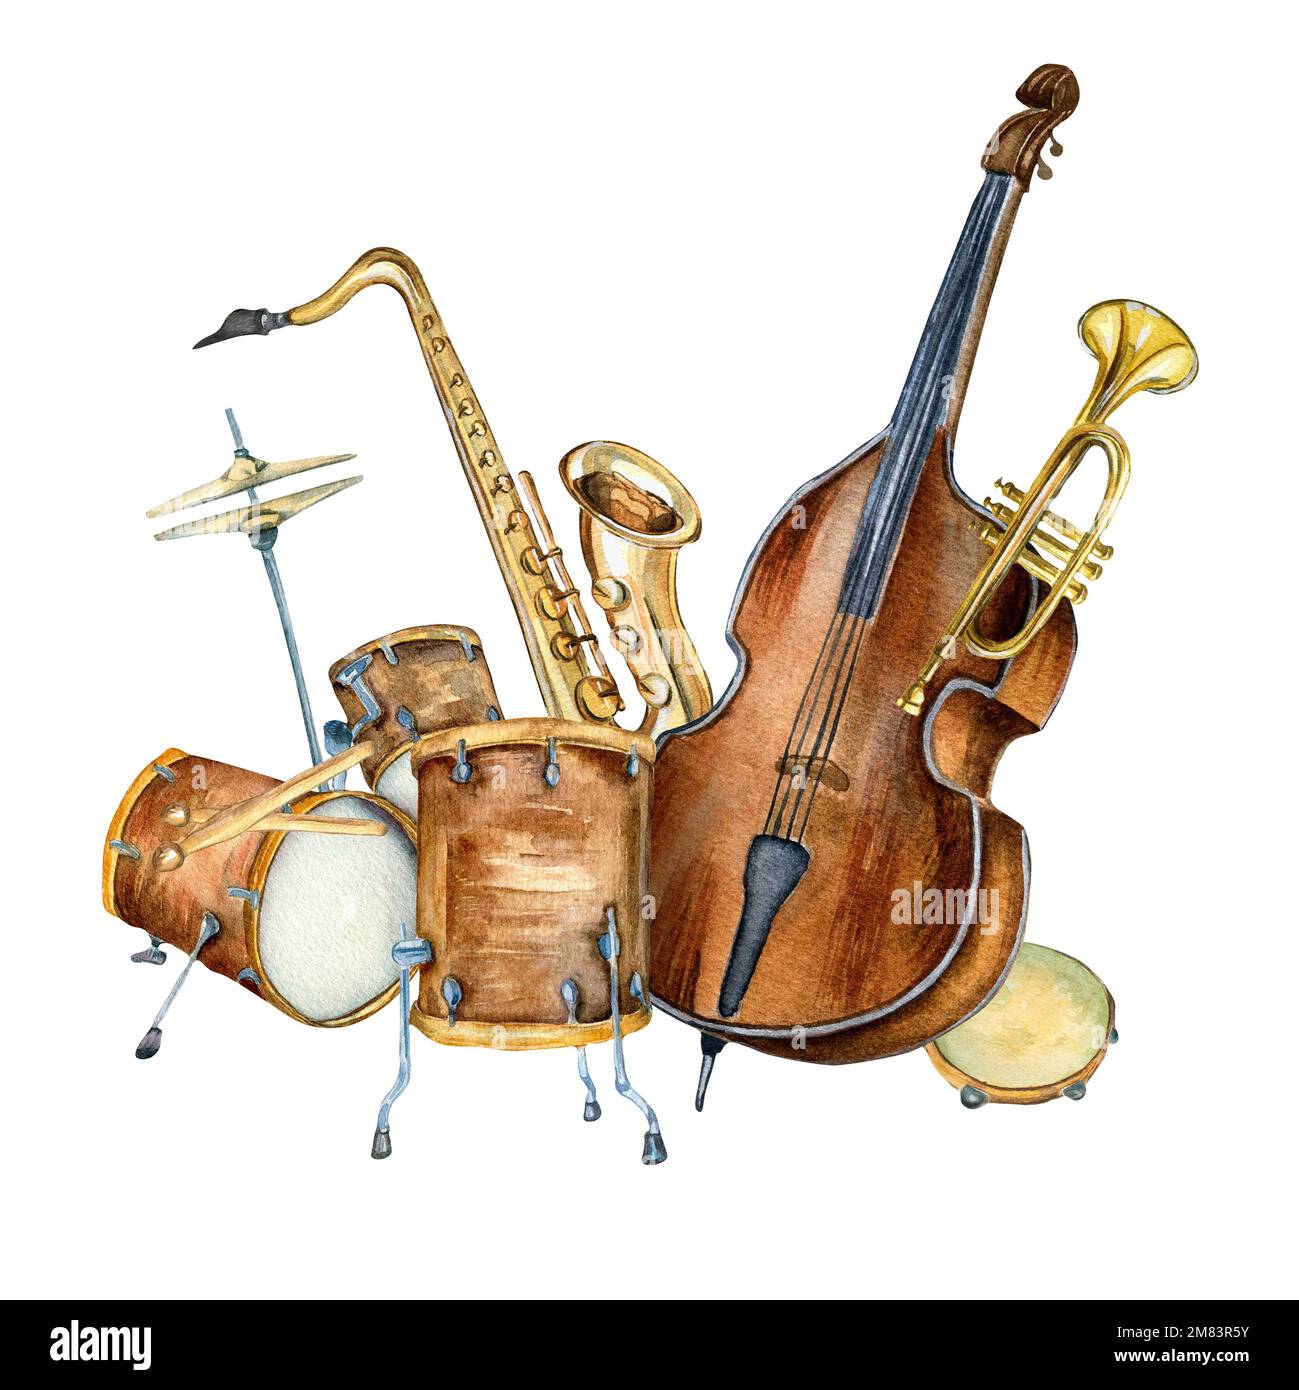 Composition of drum kit, saxophone, contrabass musical instruments watercolor illustration isolated. Jazz band, tambourine hand drawn. Design element Stock Photo